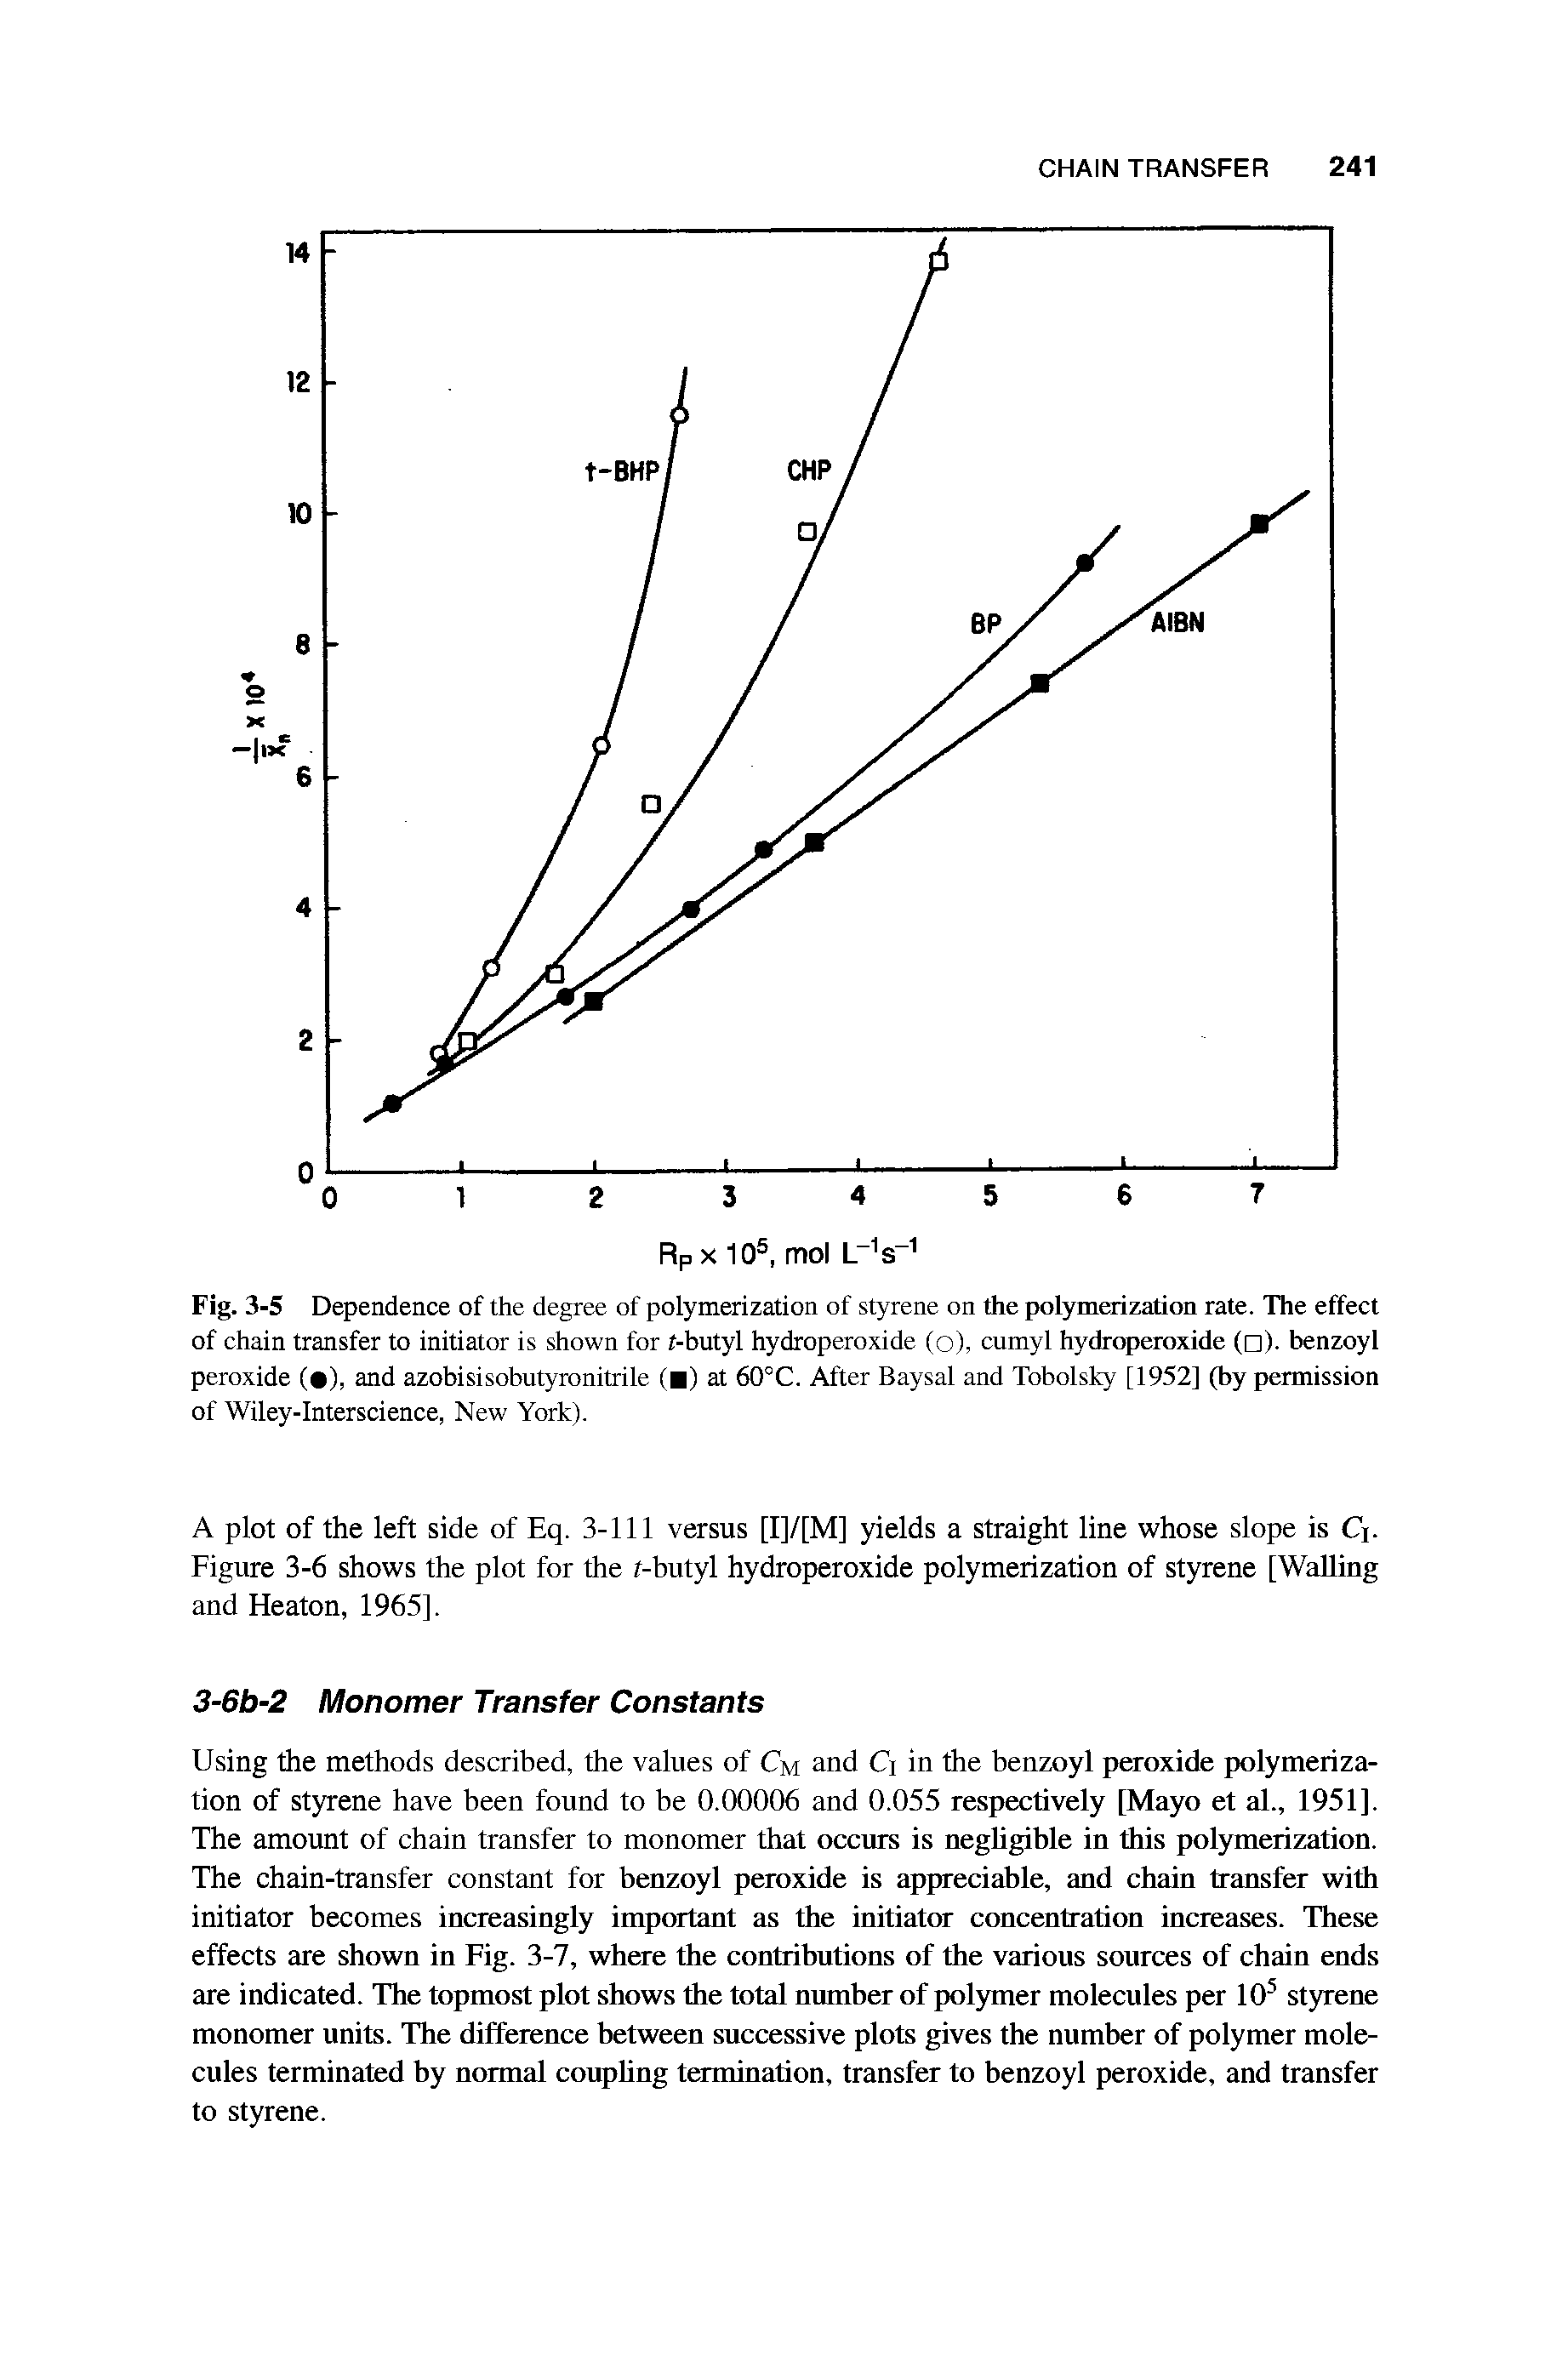 Fig. 3-5 Dependence of the degree of polymerization of styrene on the polymerization rate. The effect of chain transfer to initiator is shown for t-butyl hydroperoxide (o), cumyl hydroperoxide ( ). benzoyl peroxide ( ), and azobisisobutyronitrile ( ) at 60°C. After Baysal and Tobolsky [1952] (by permission of Wiley-Interscience, New York).